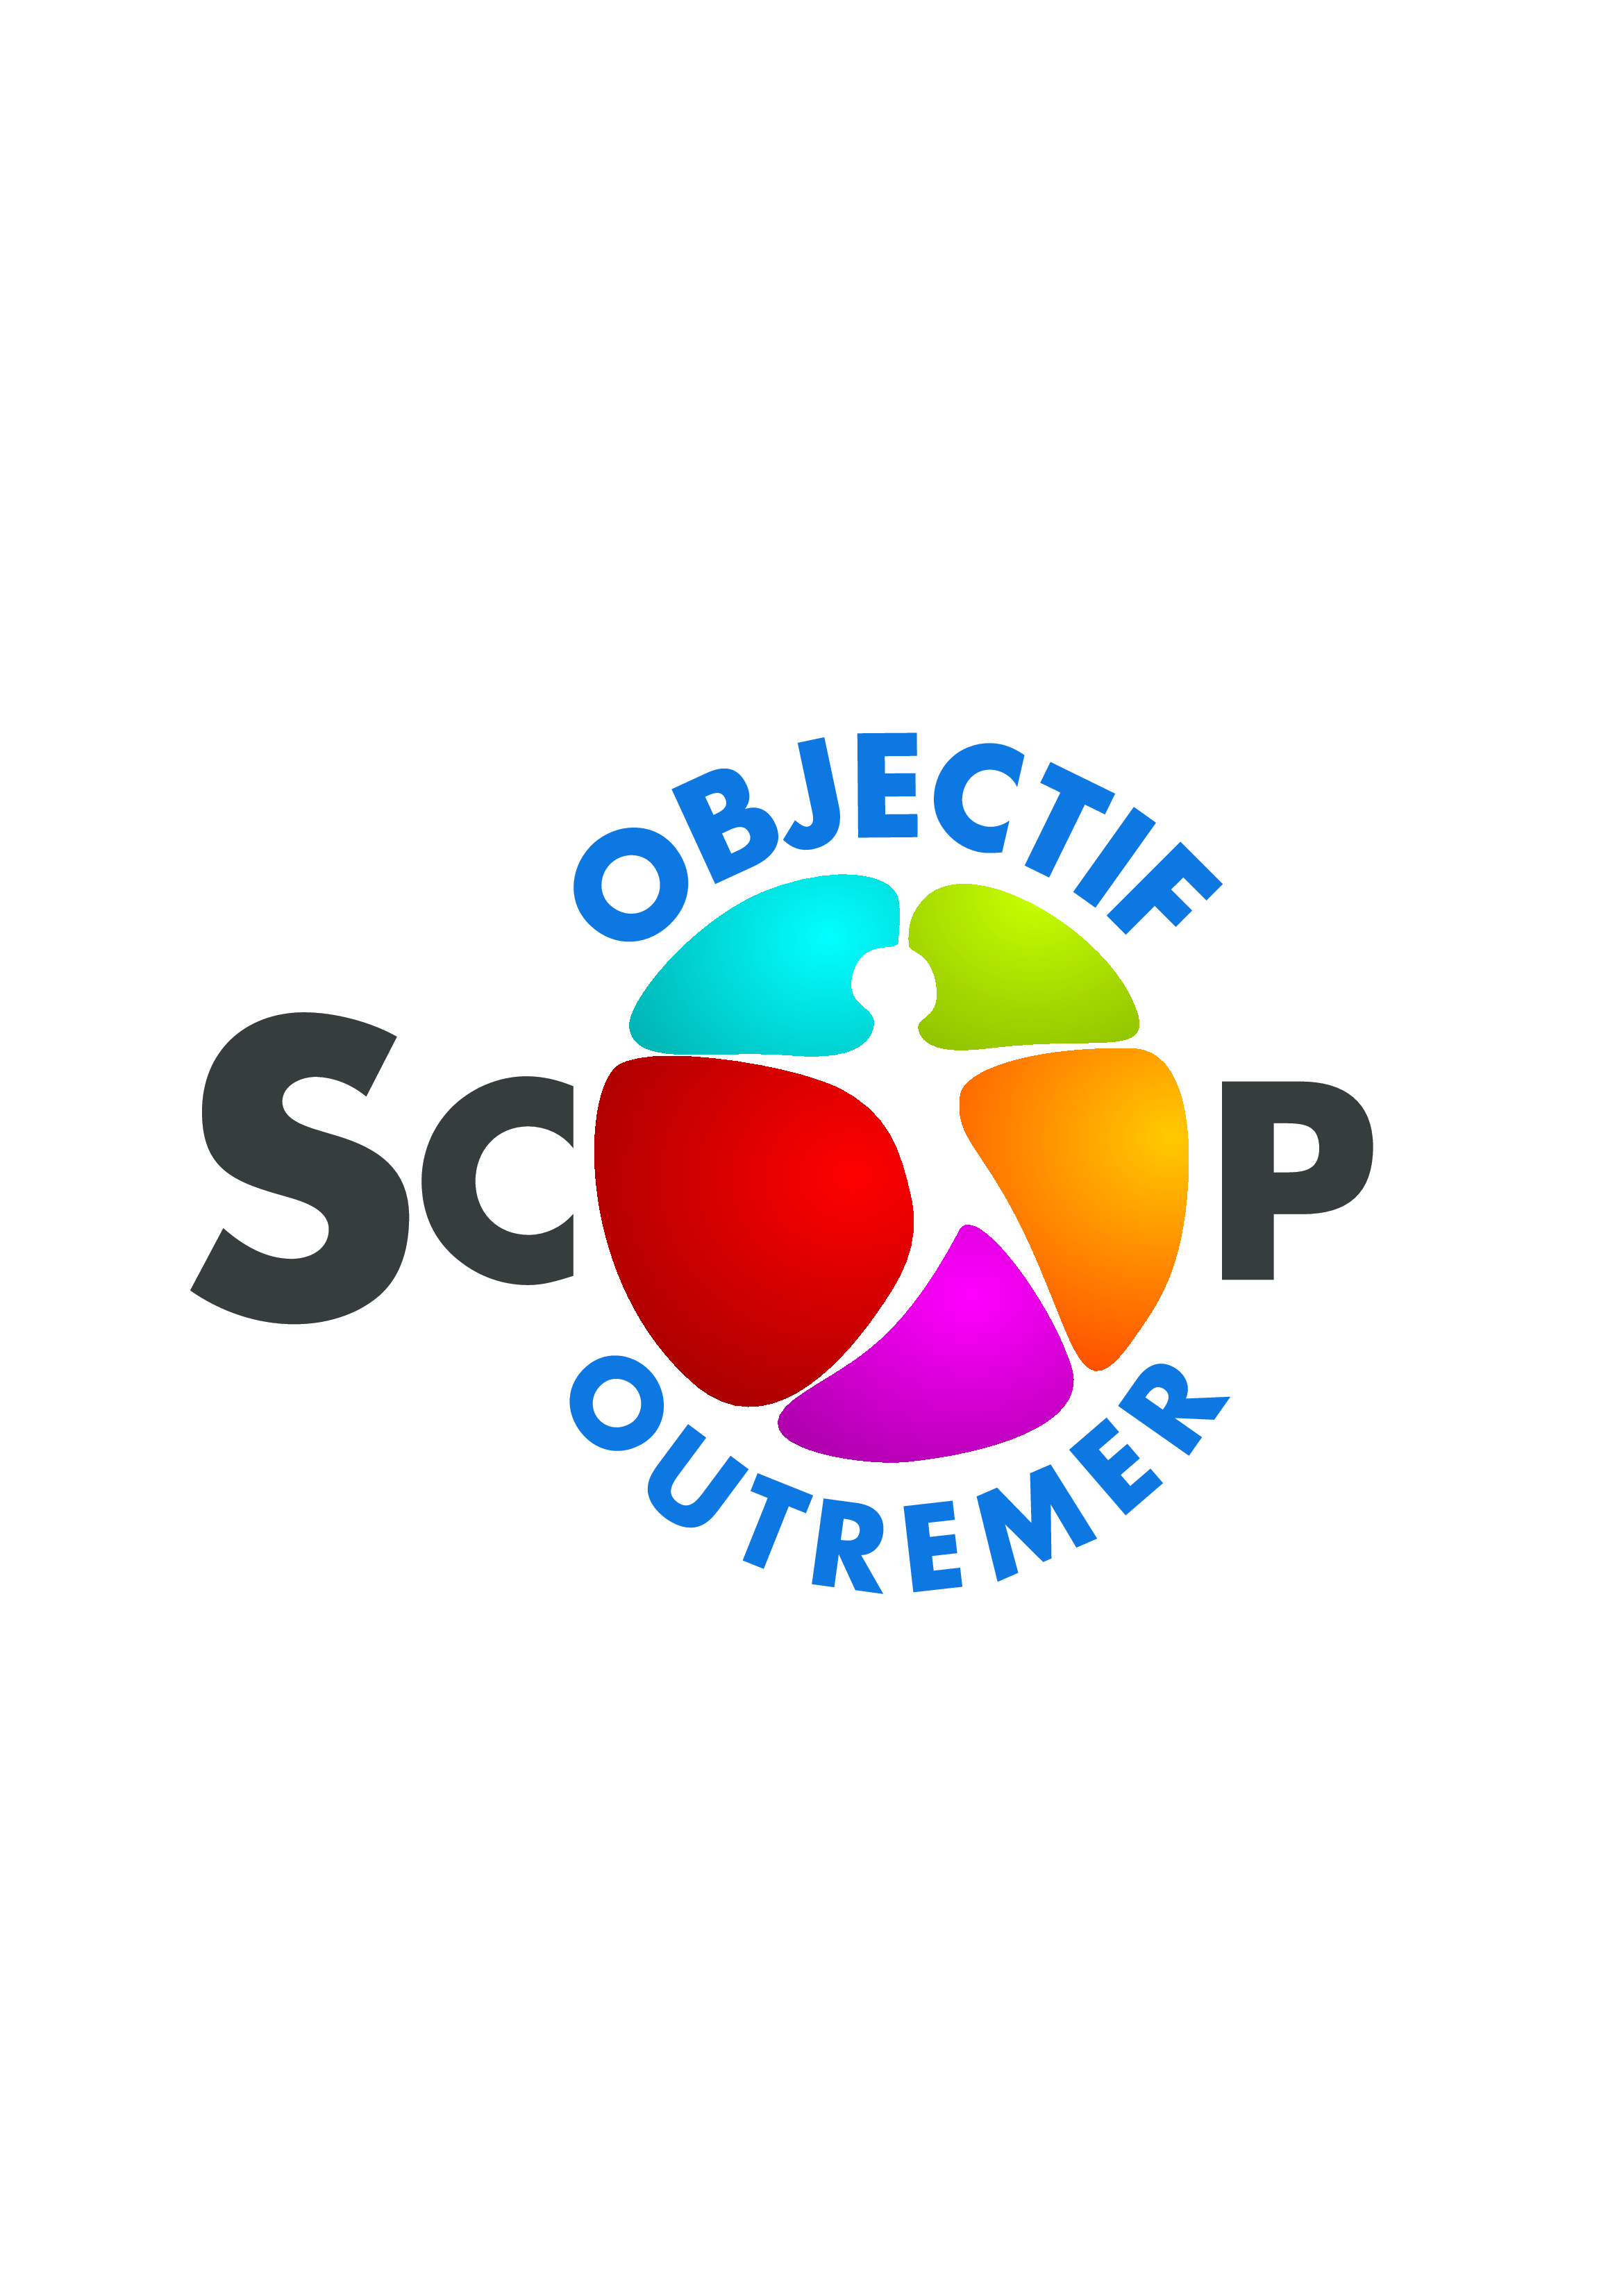 OBJECTIF SCOP OUTREMER